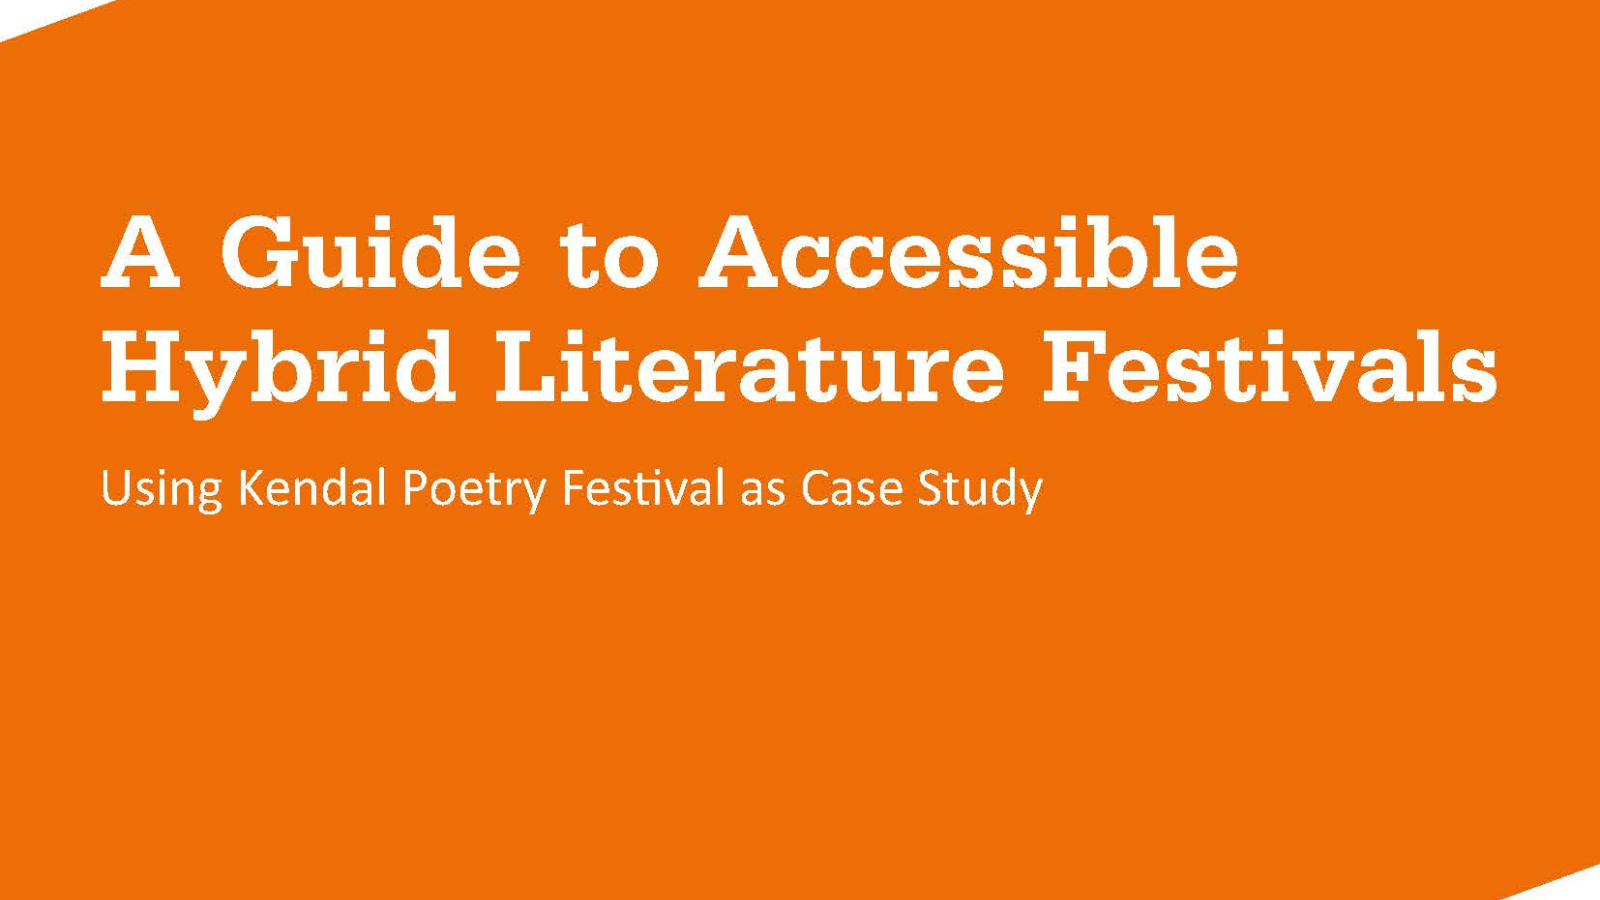 Orange background with white text that reads 'A Guide to Accessible Hybrid Literature Festivals Using Kendal Poetry Festival as Case Study.'